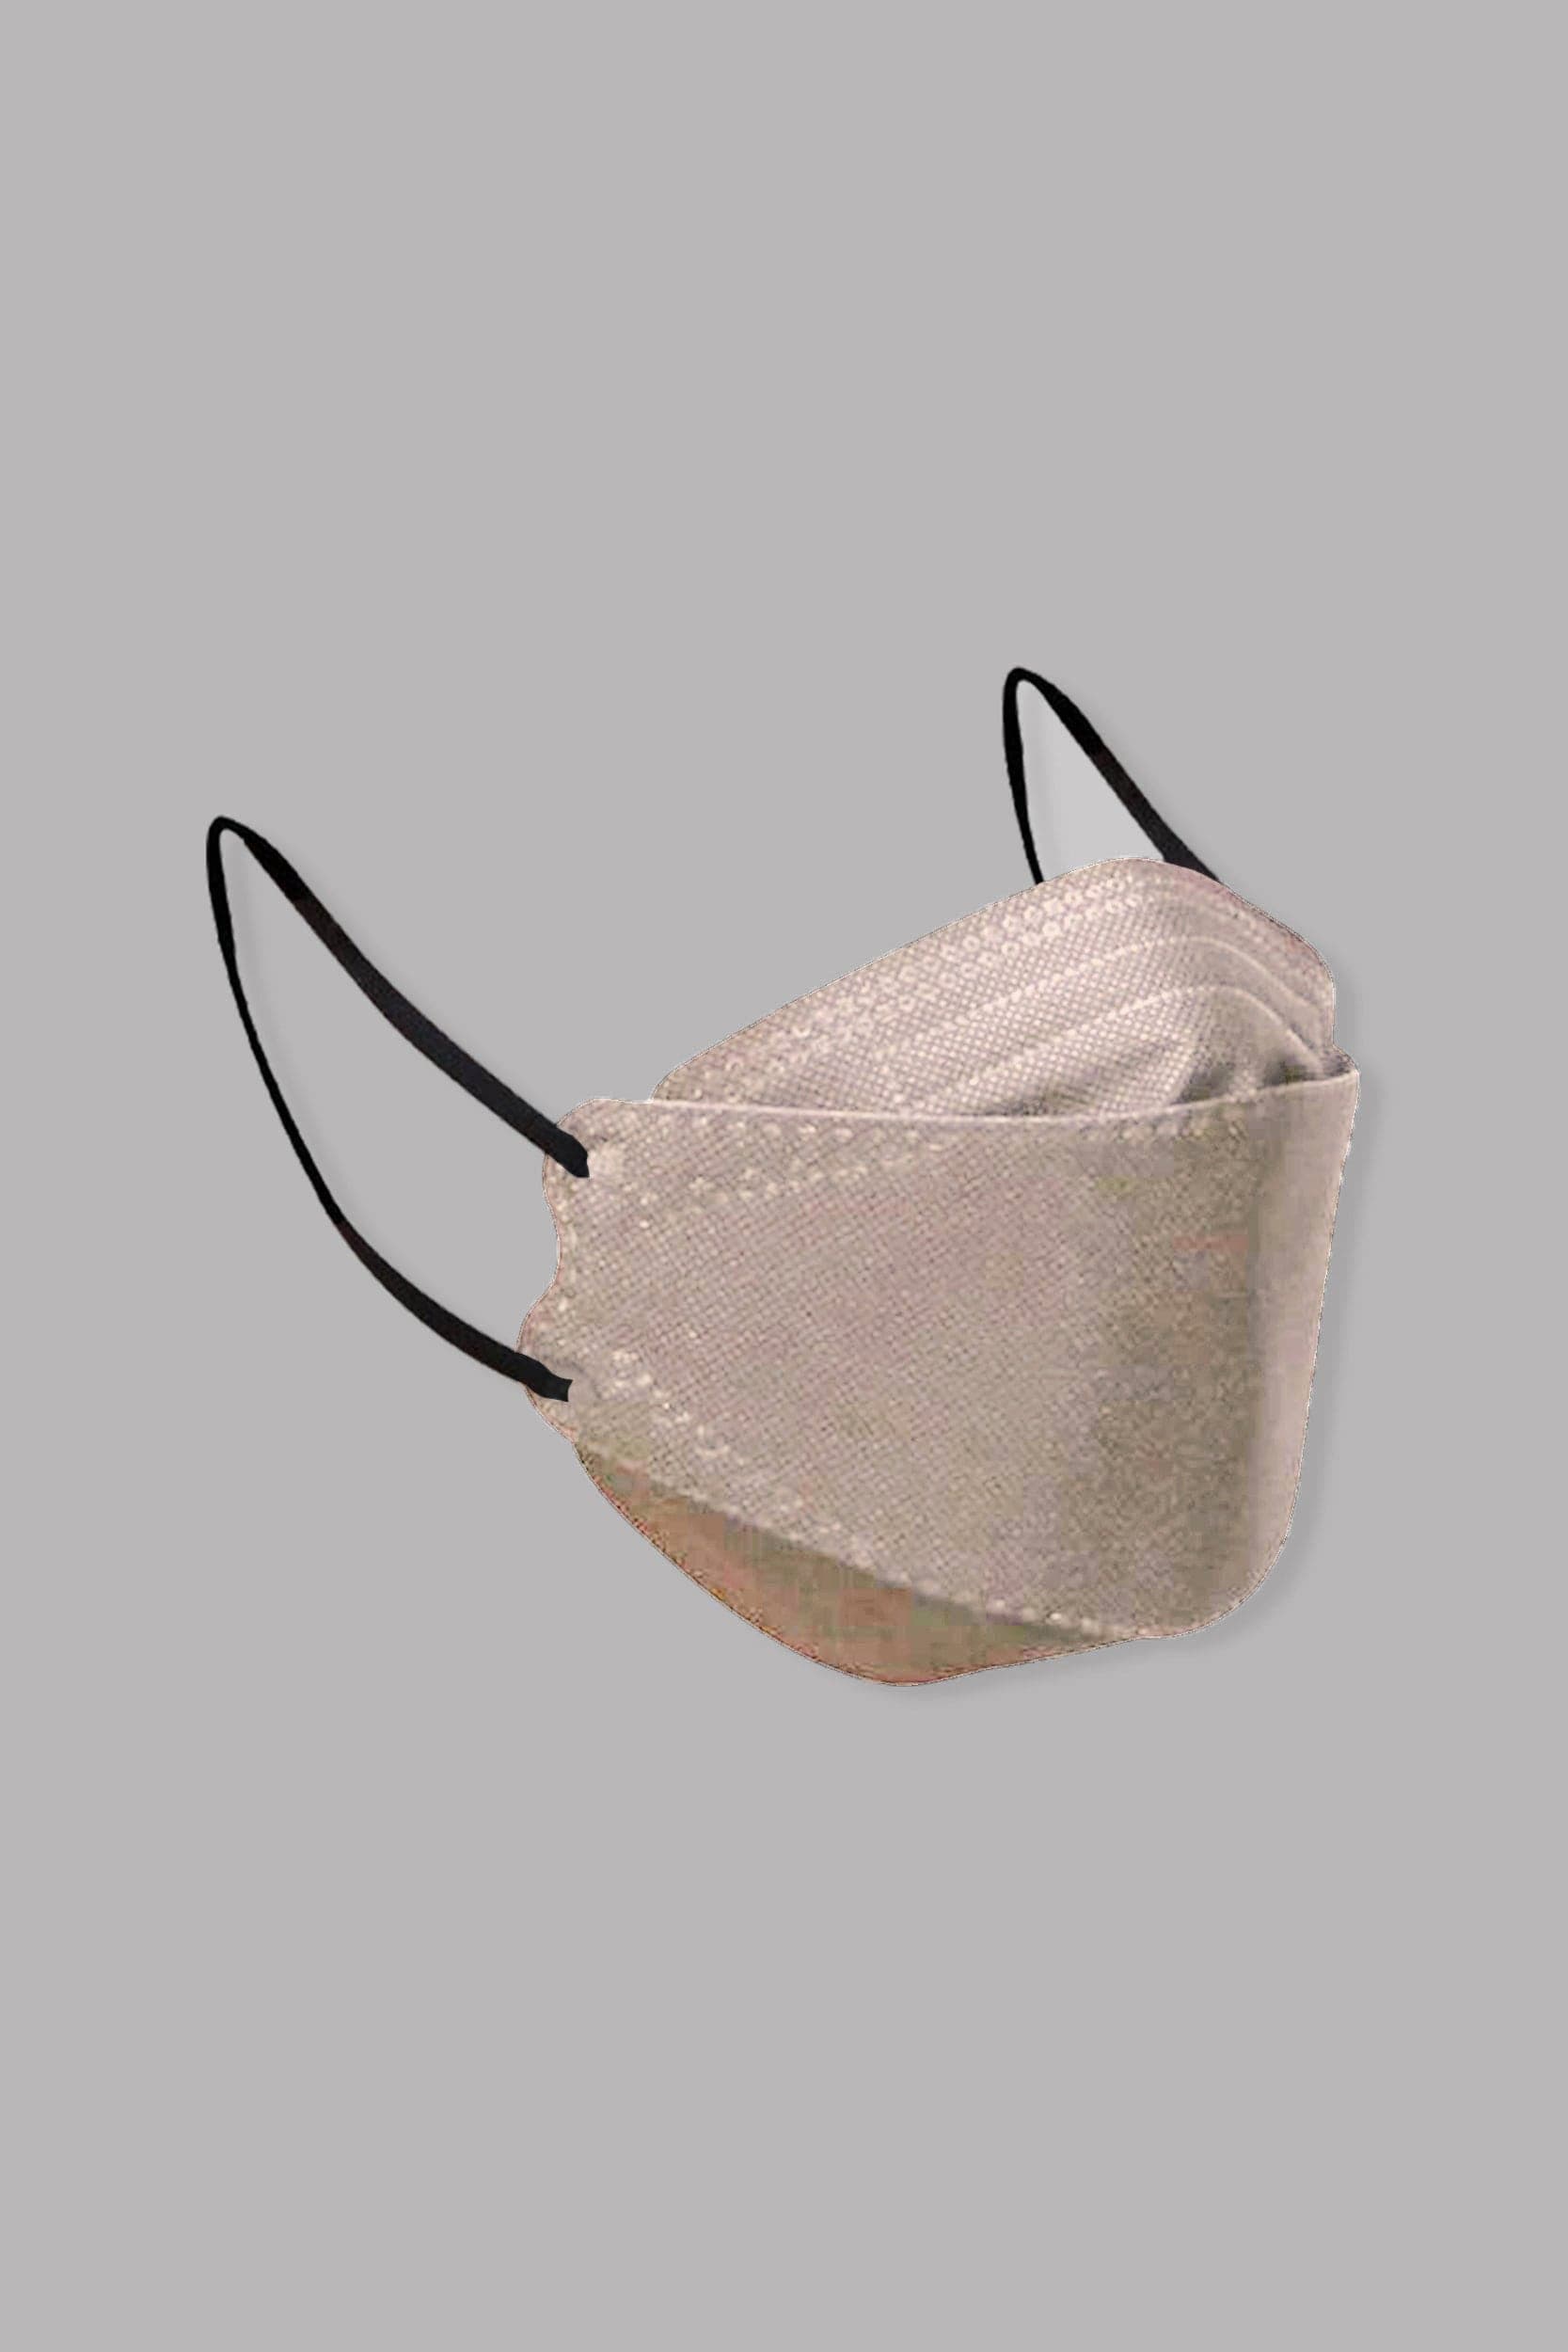 Stylish light brown KF94 face mask, with soft black ear loops and high quality fabric. 